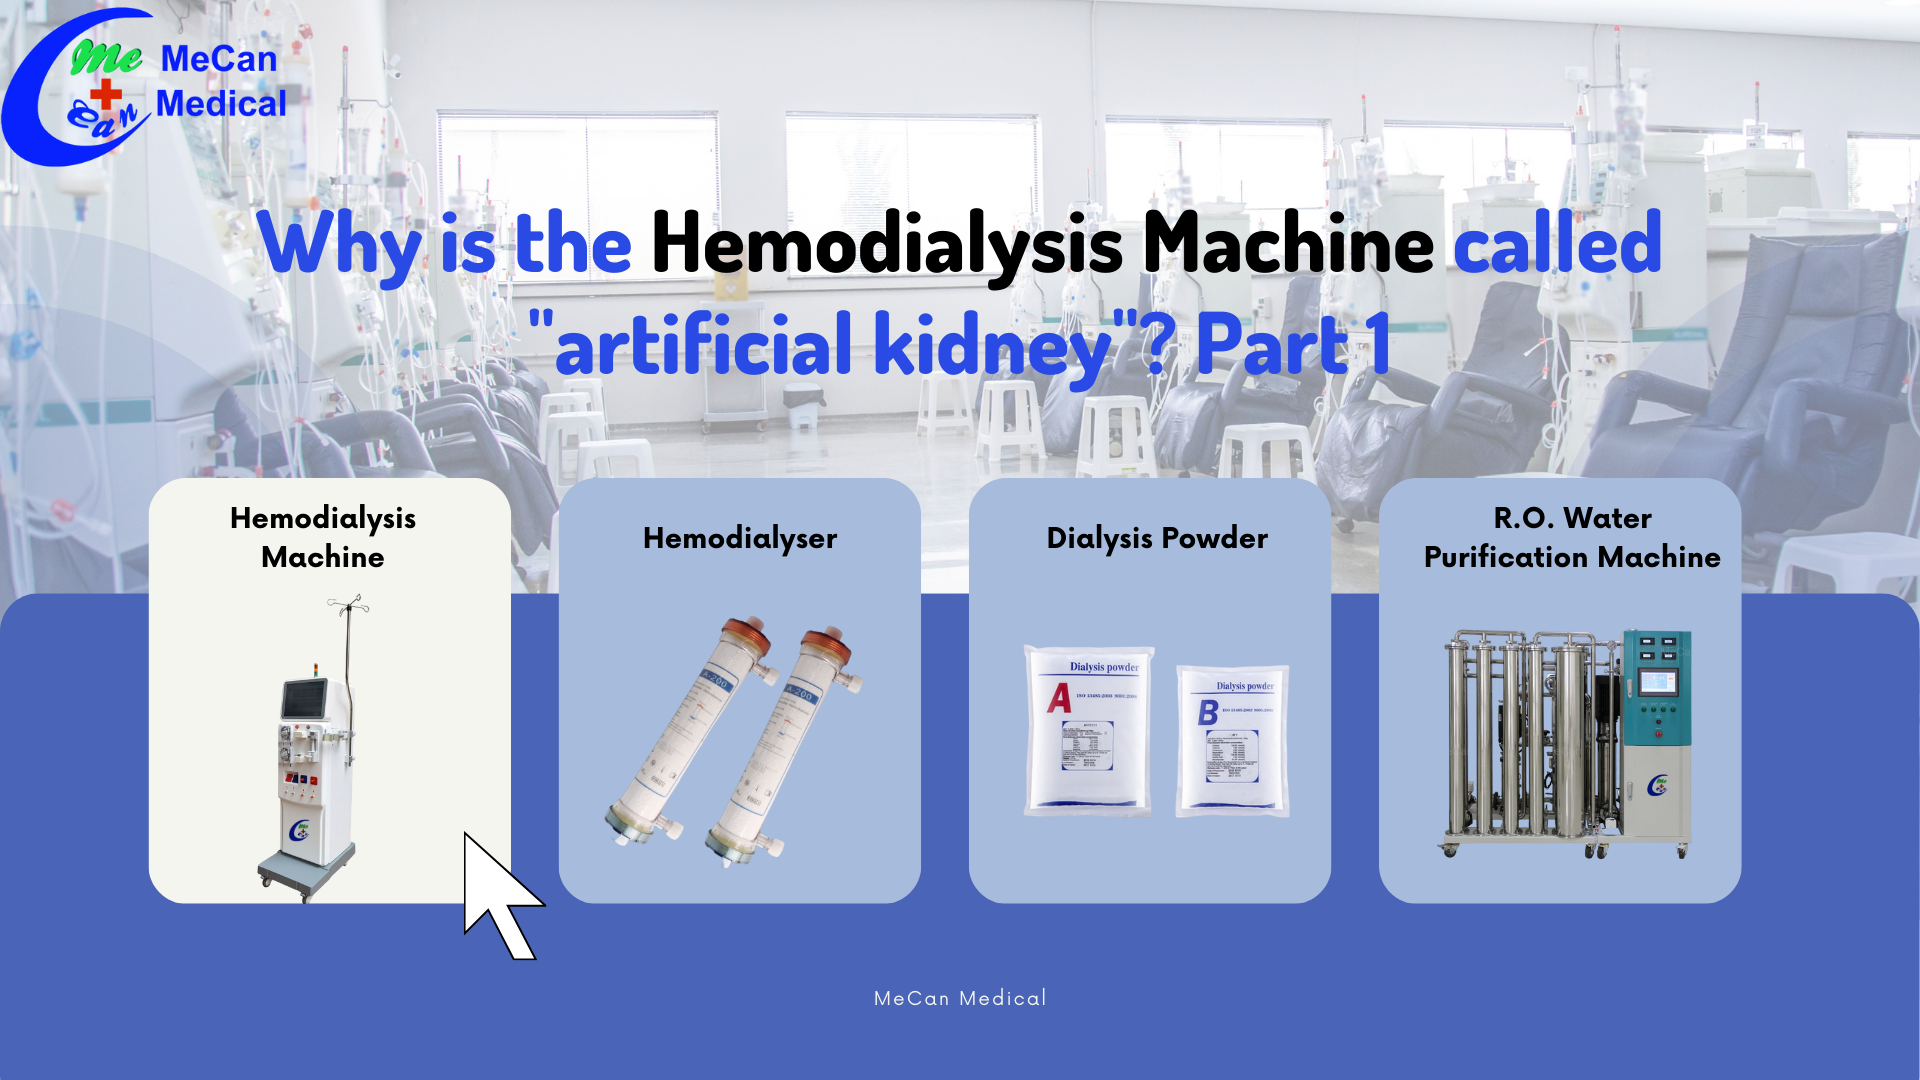 Part 1 Why is the Hemodialysis Machine called "artificial kidney"? 